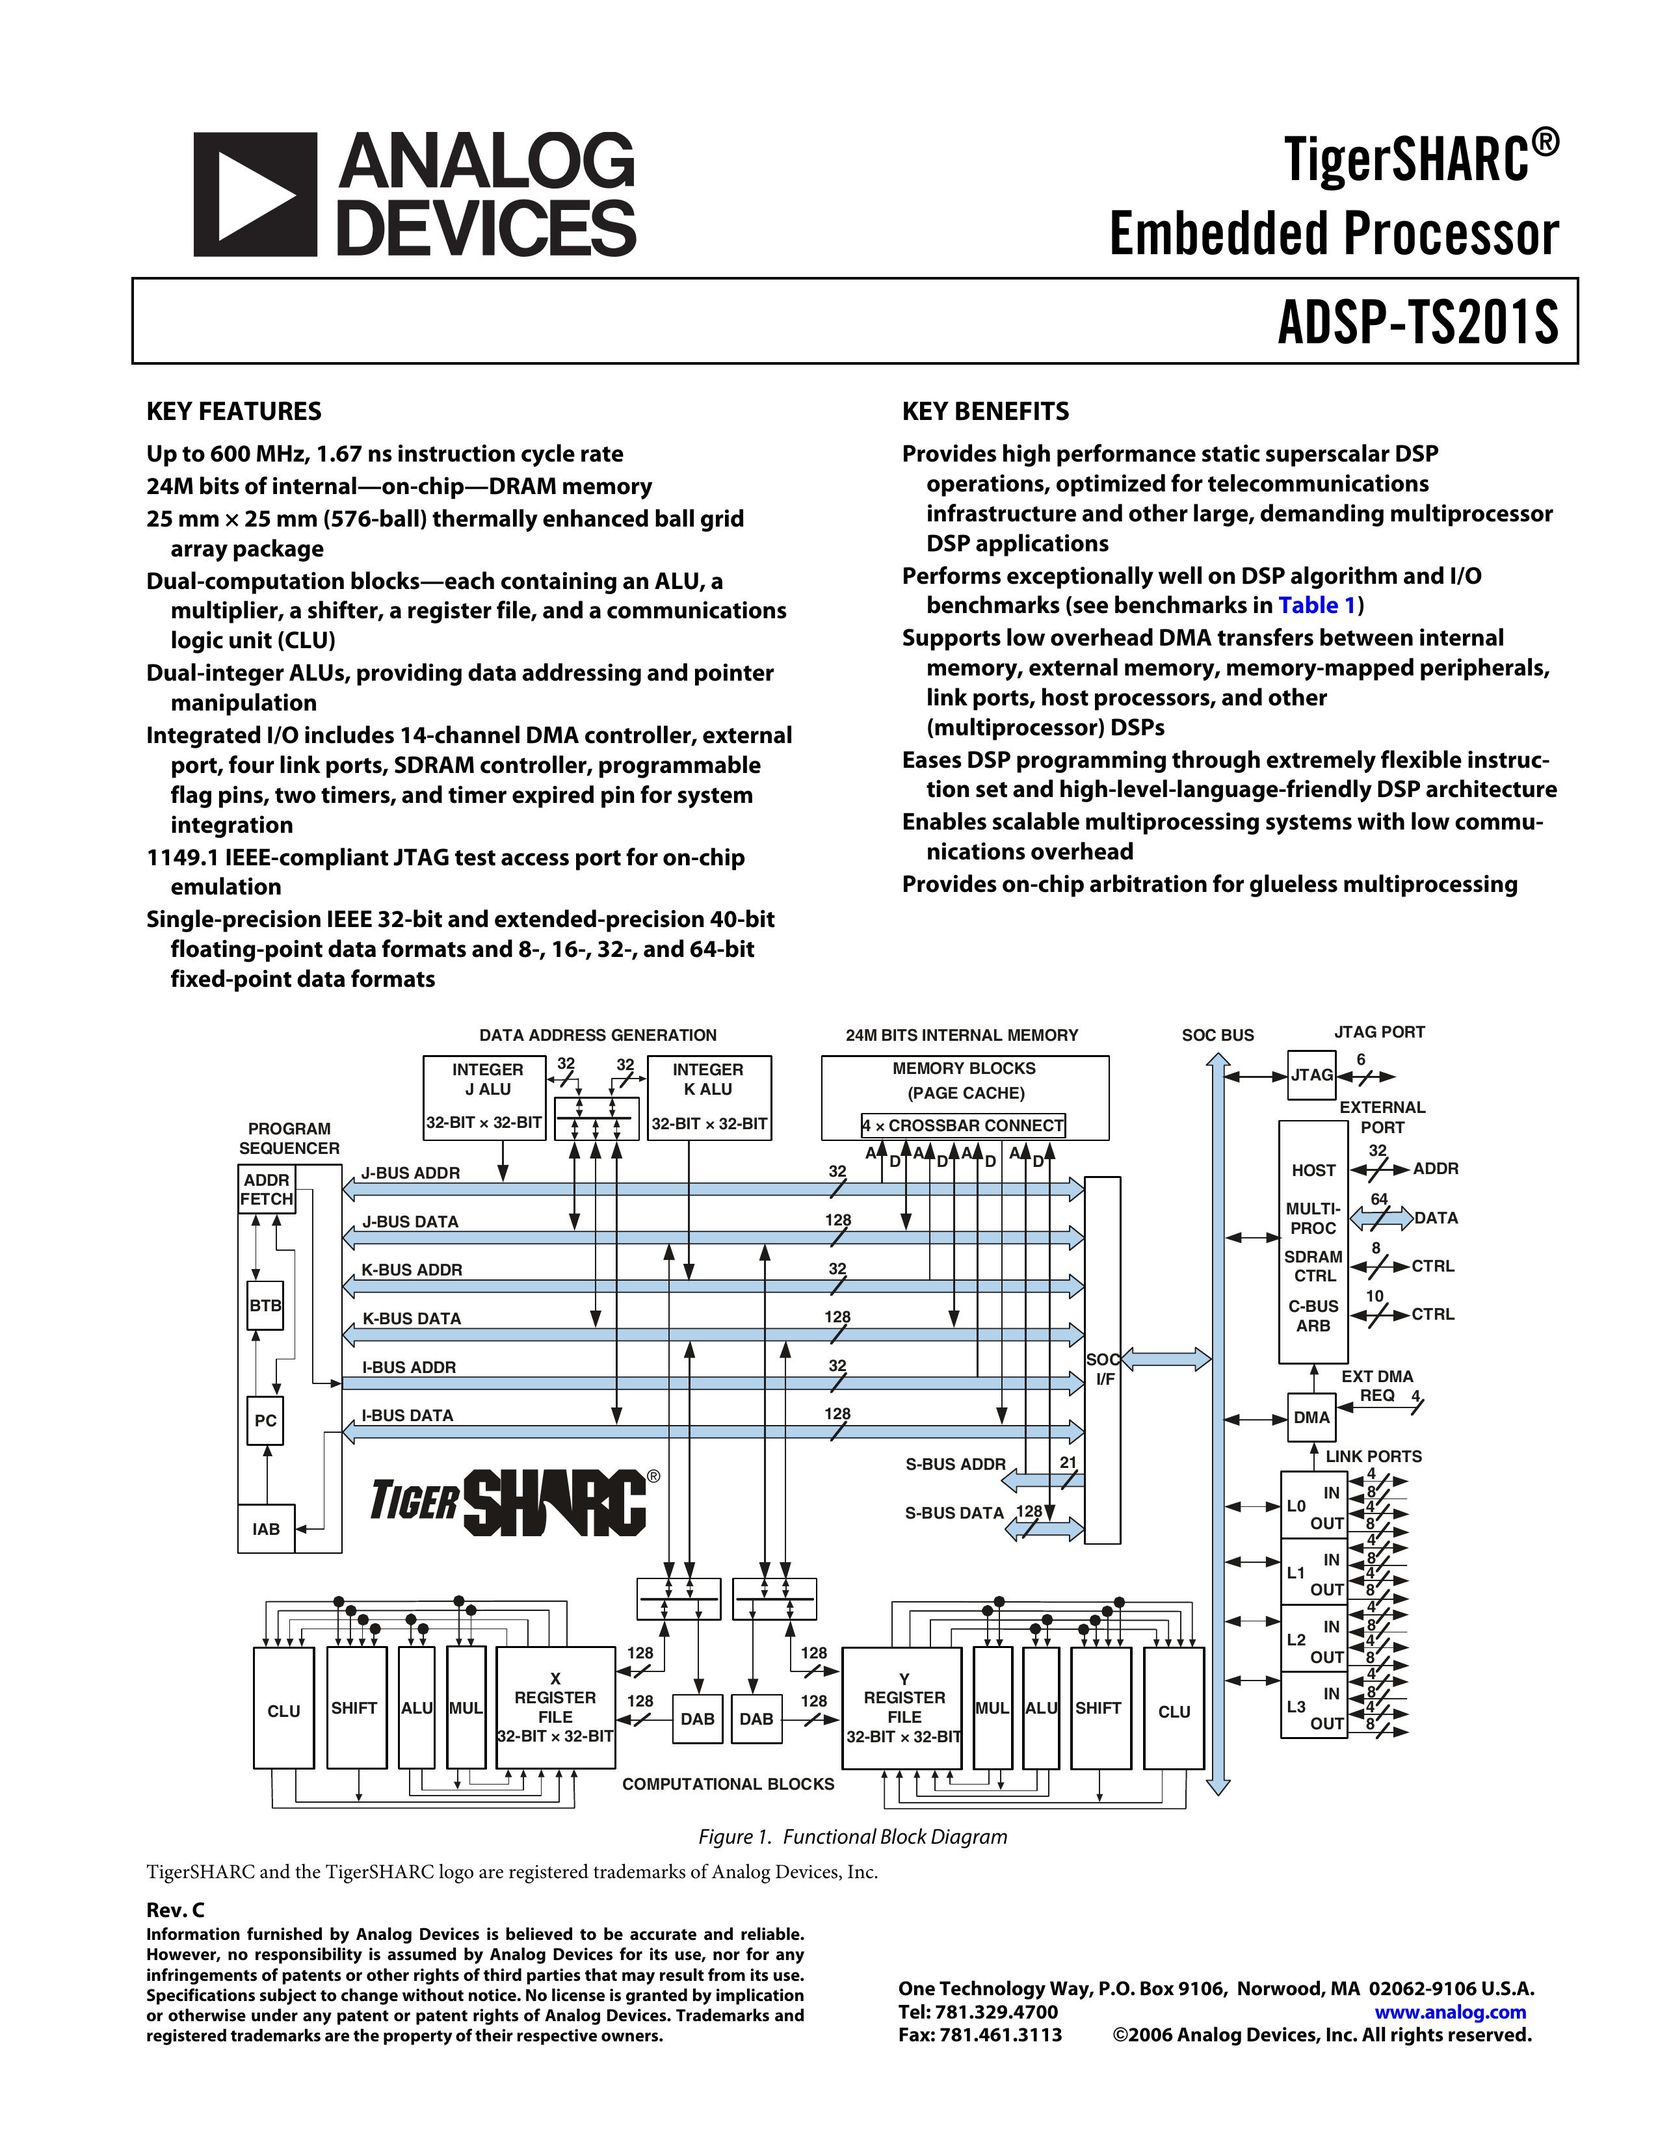 Analog Devices ADSP-TS201S Network Card User Manual